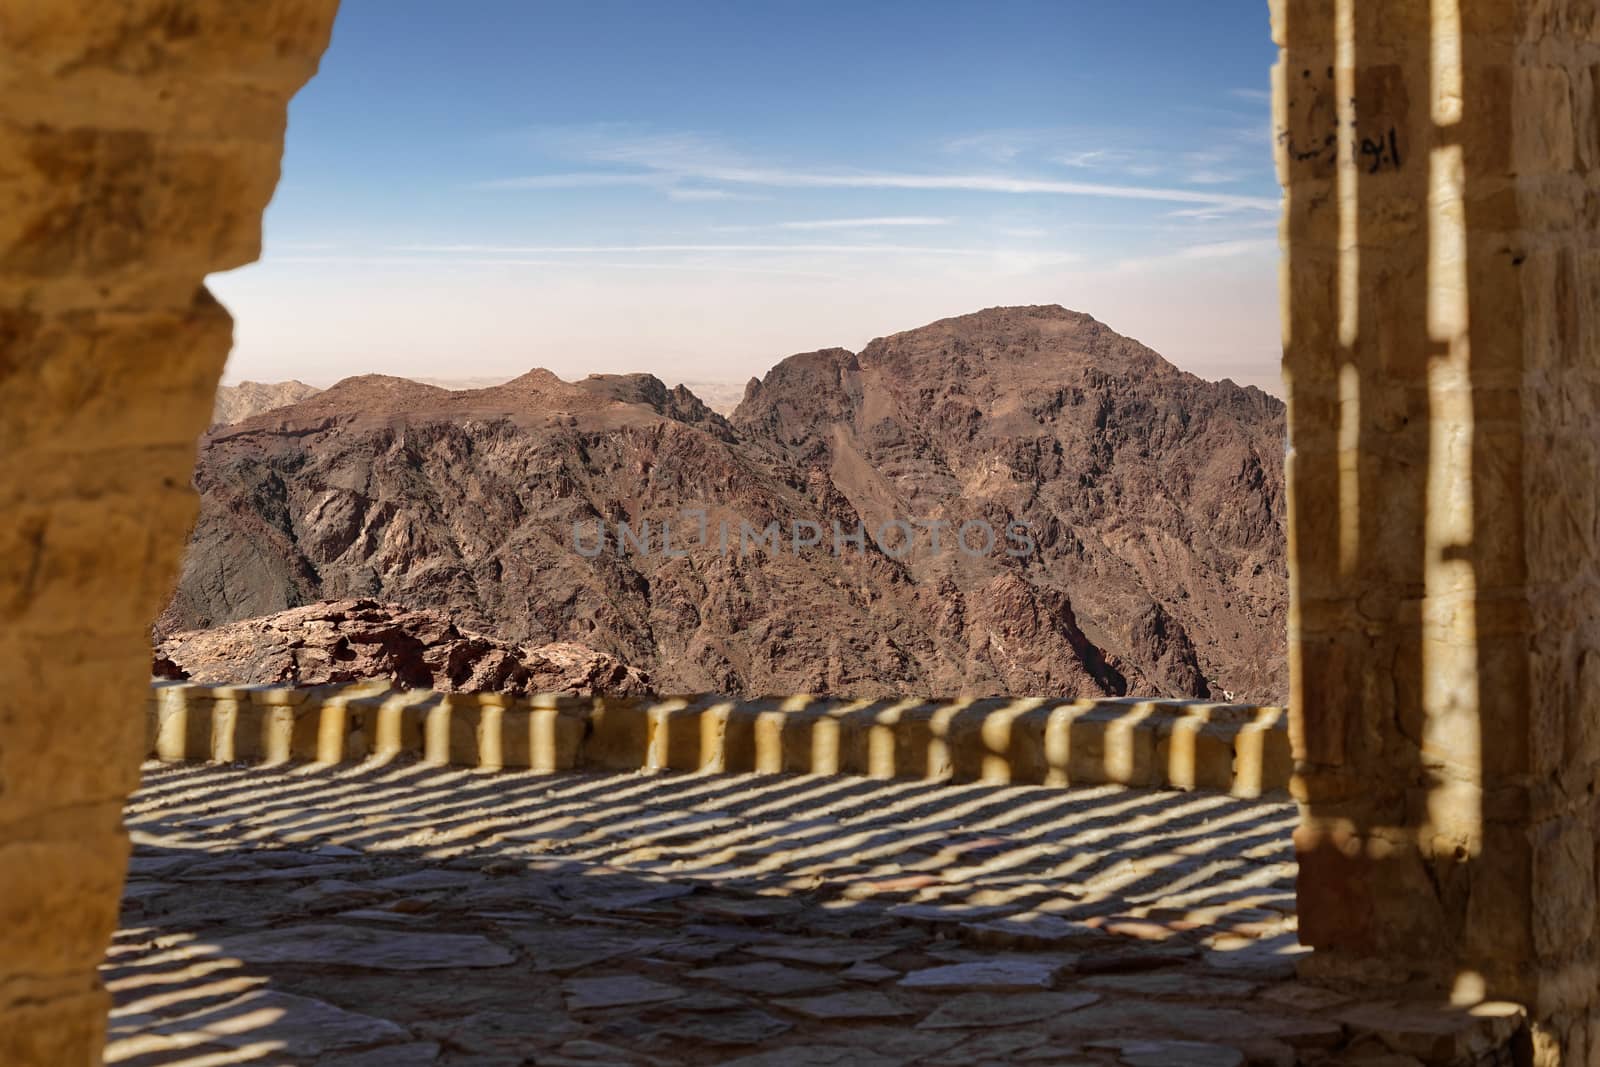 View over a terrace to the barren mountain landscape in southern Jordan by geogif